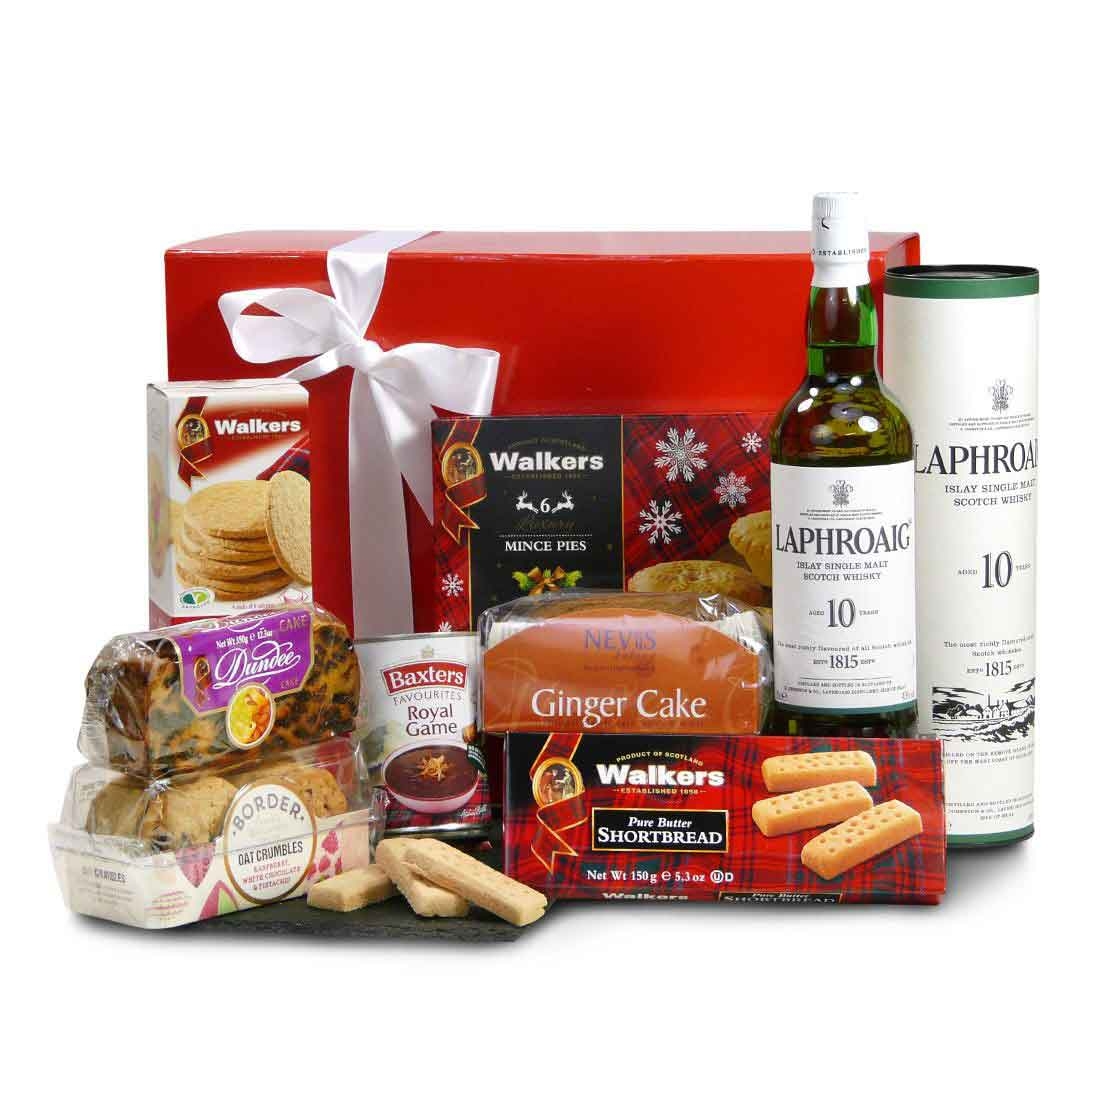 Whisky Hampers